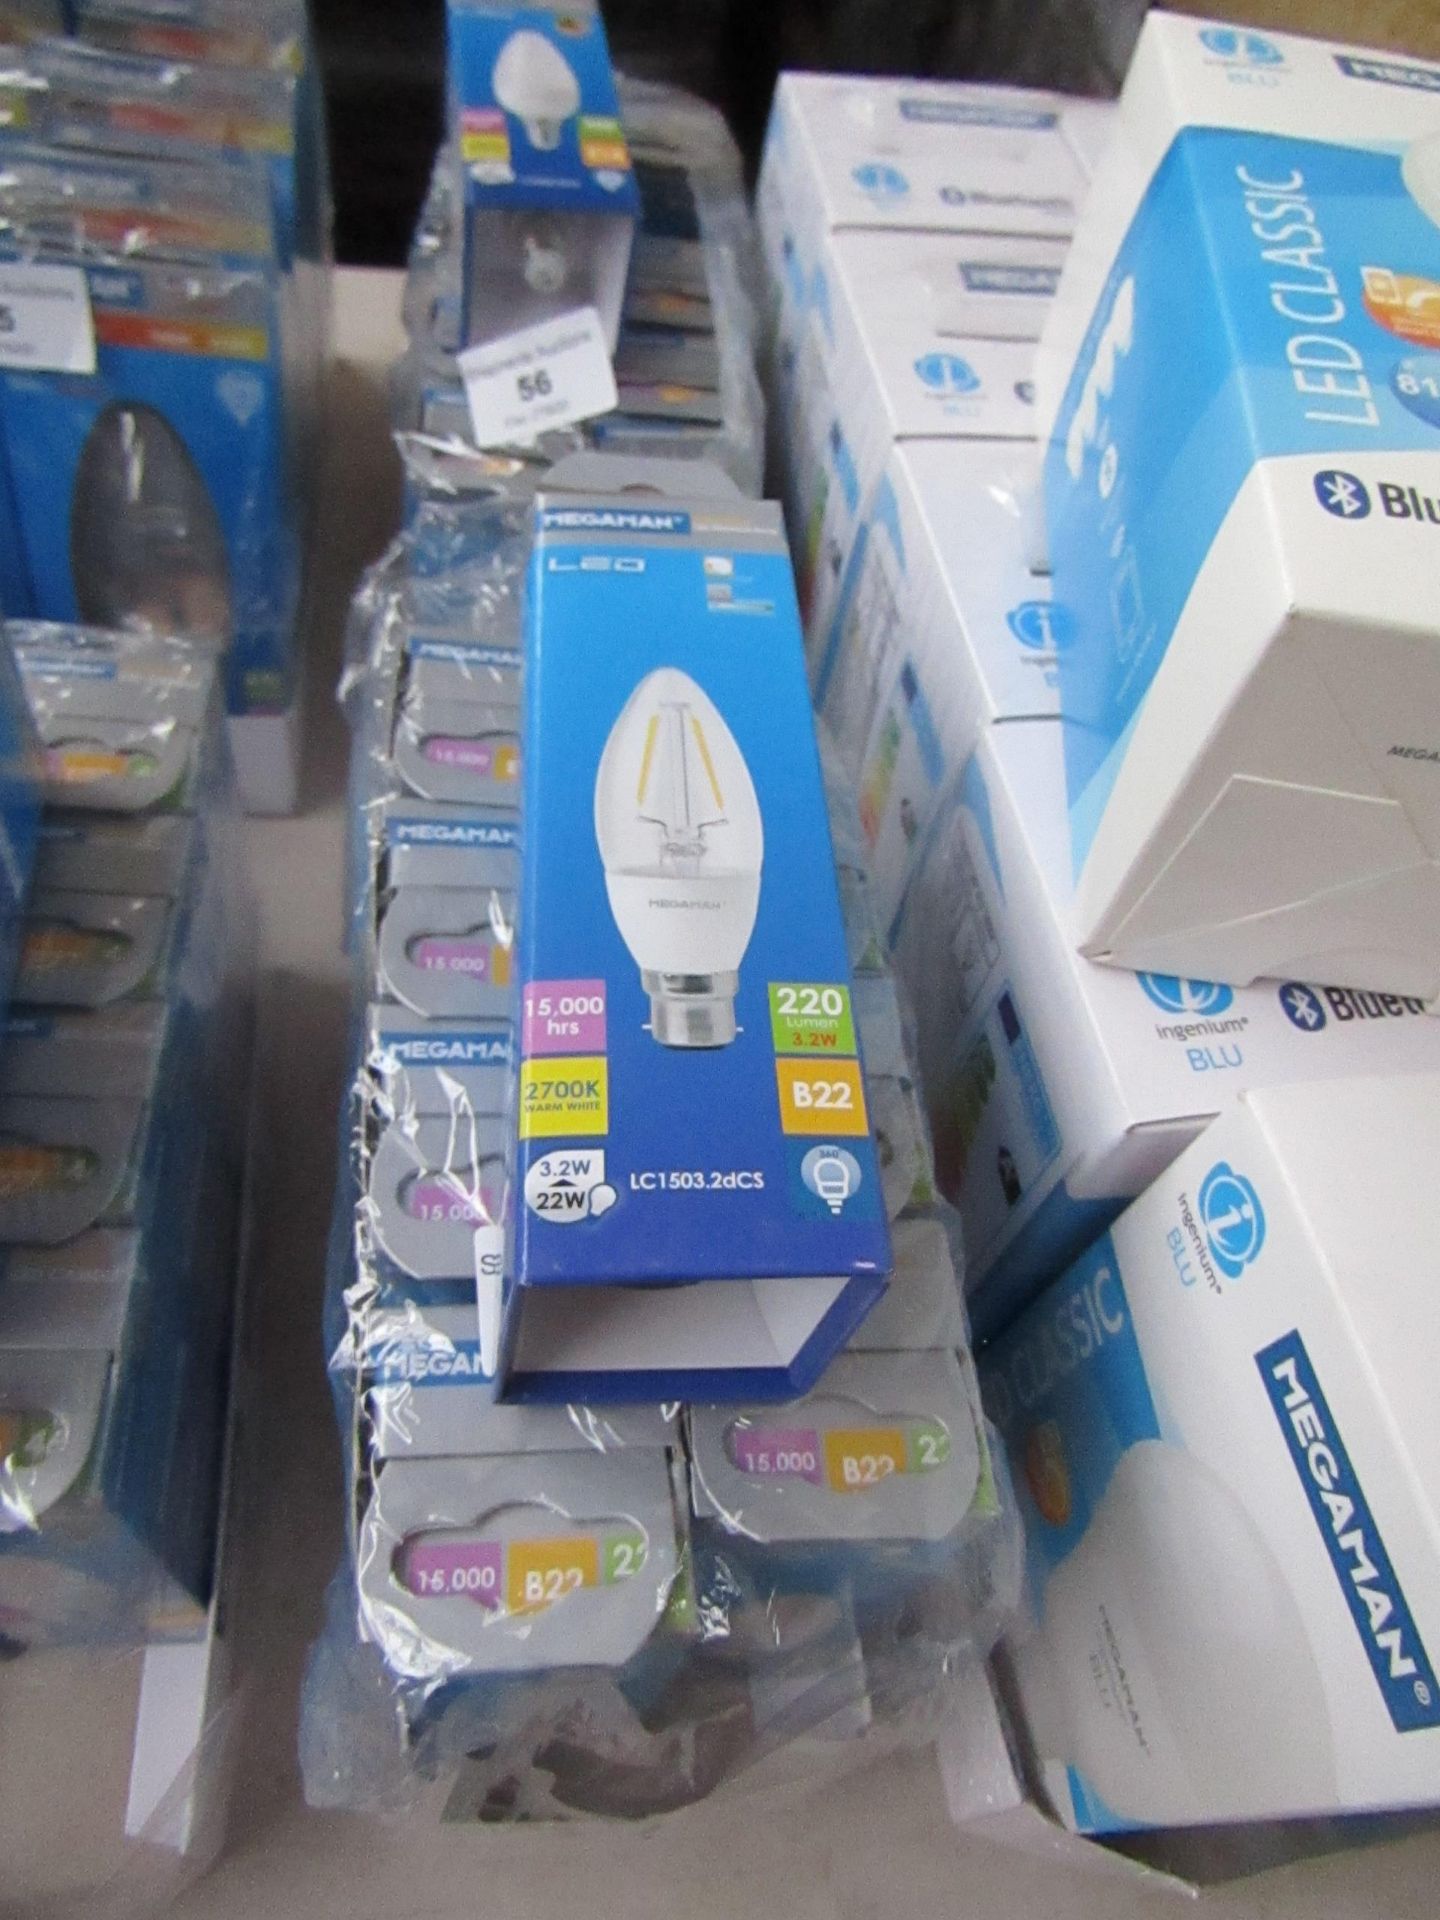 8x Megaman LED dimmable candle bulb, new and boxed. 15,000Hrs / B22 / 220 Lumens